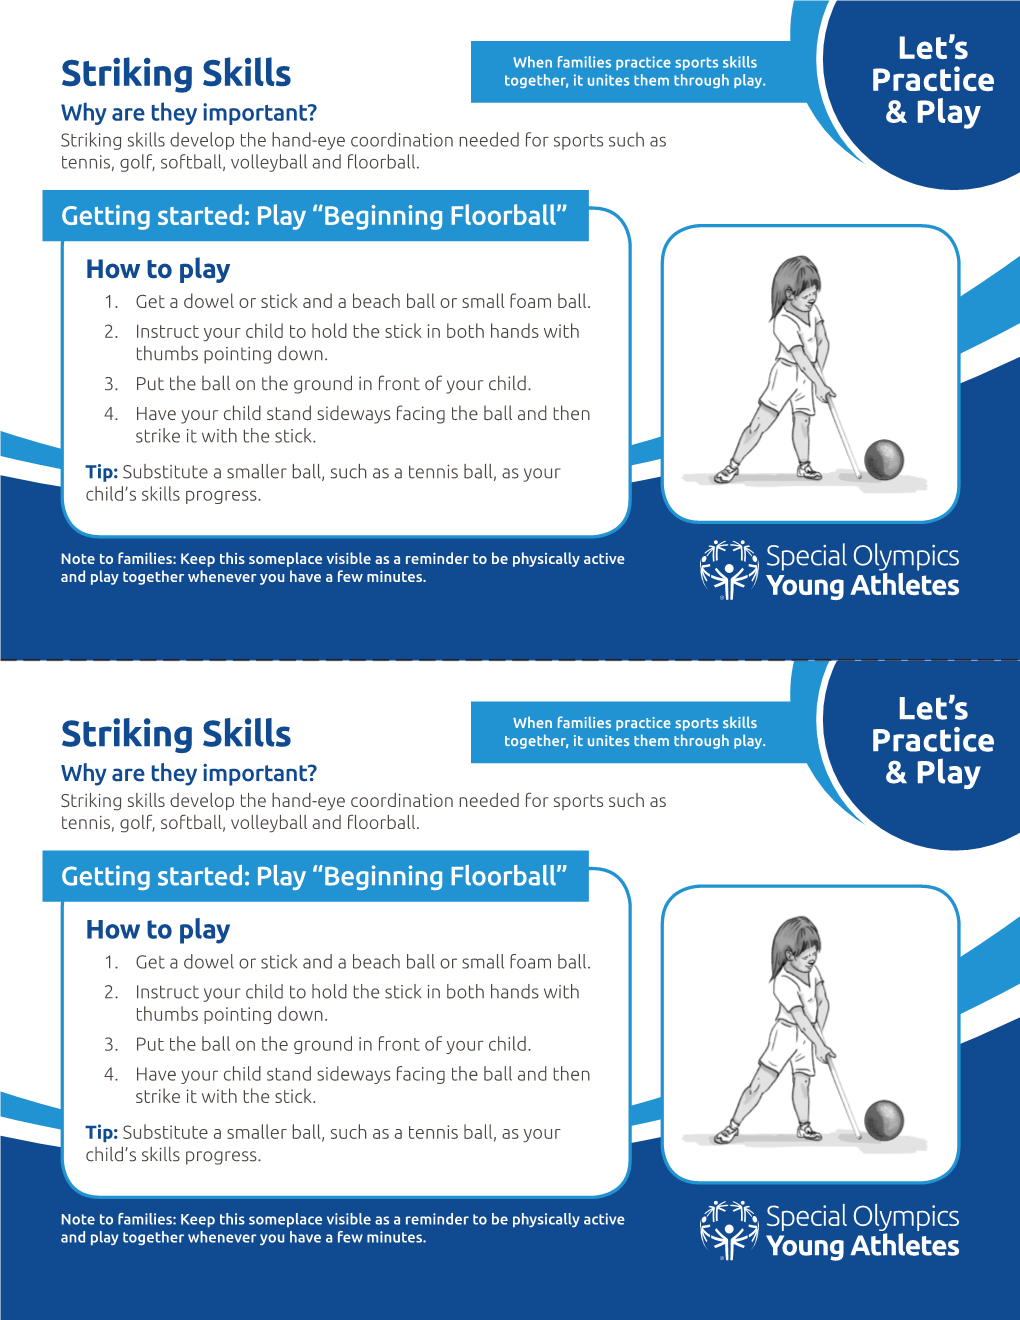 Young Athletes Striking Skills Let's Practice & Play